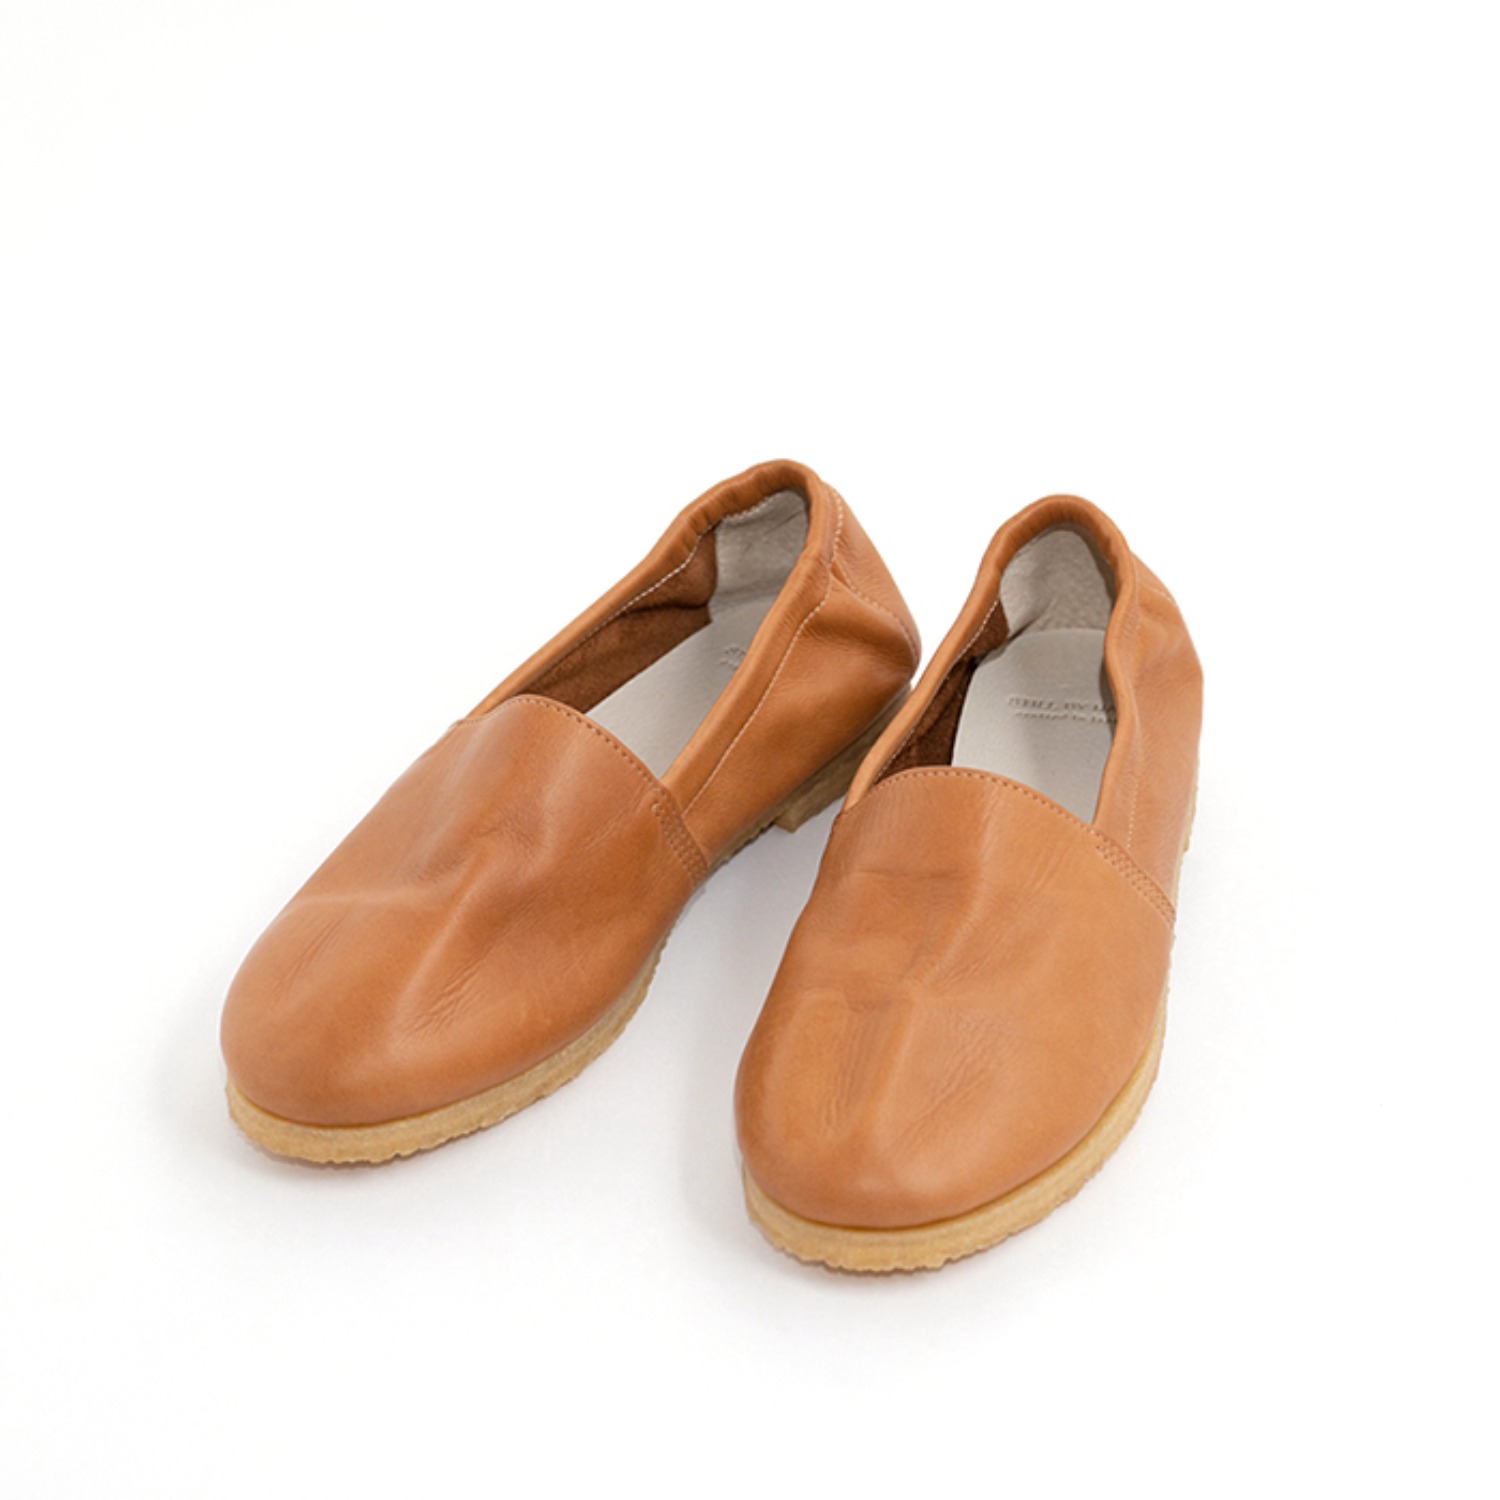 leather slip on shoes camel